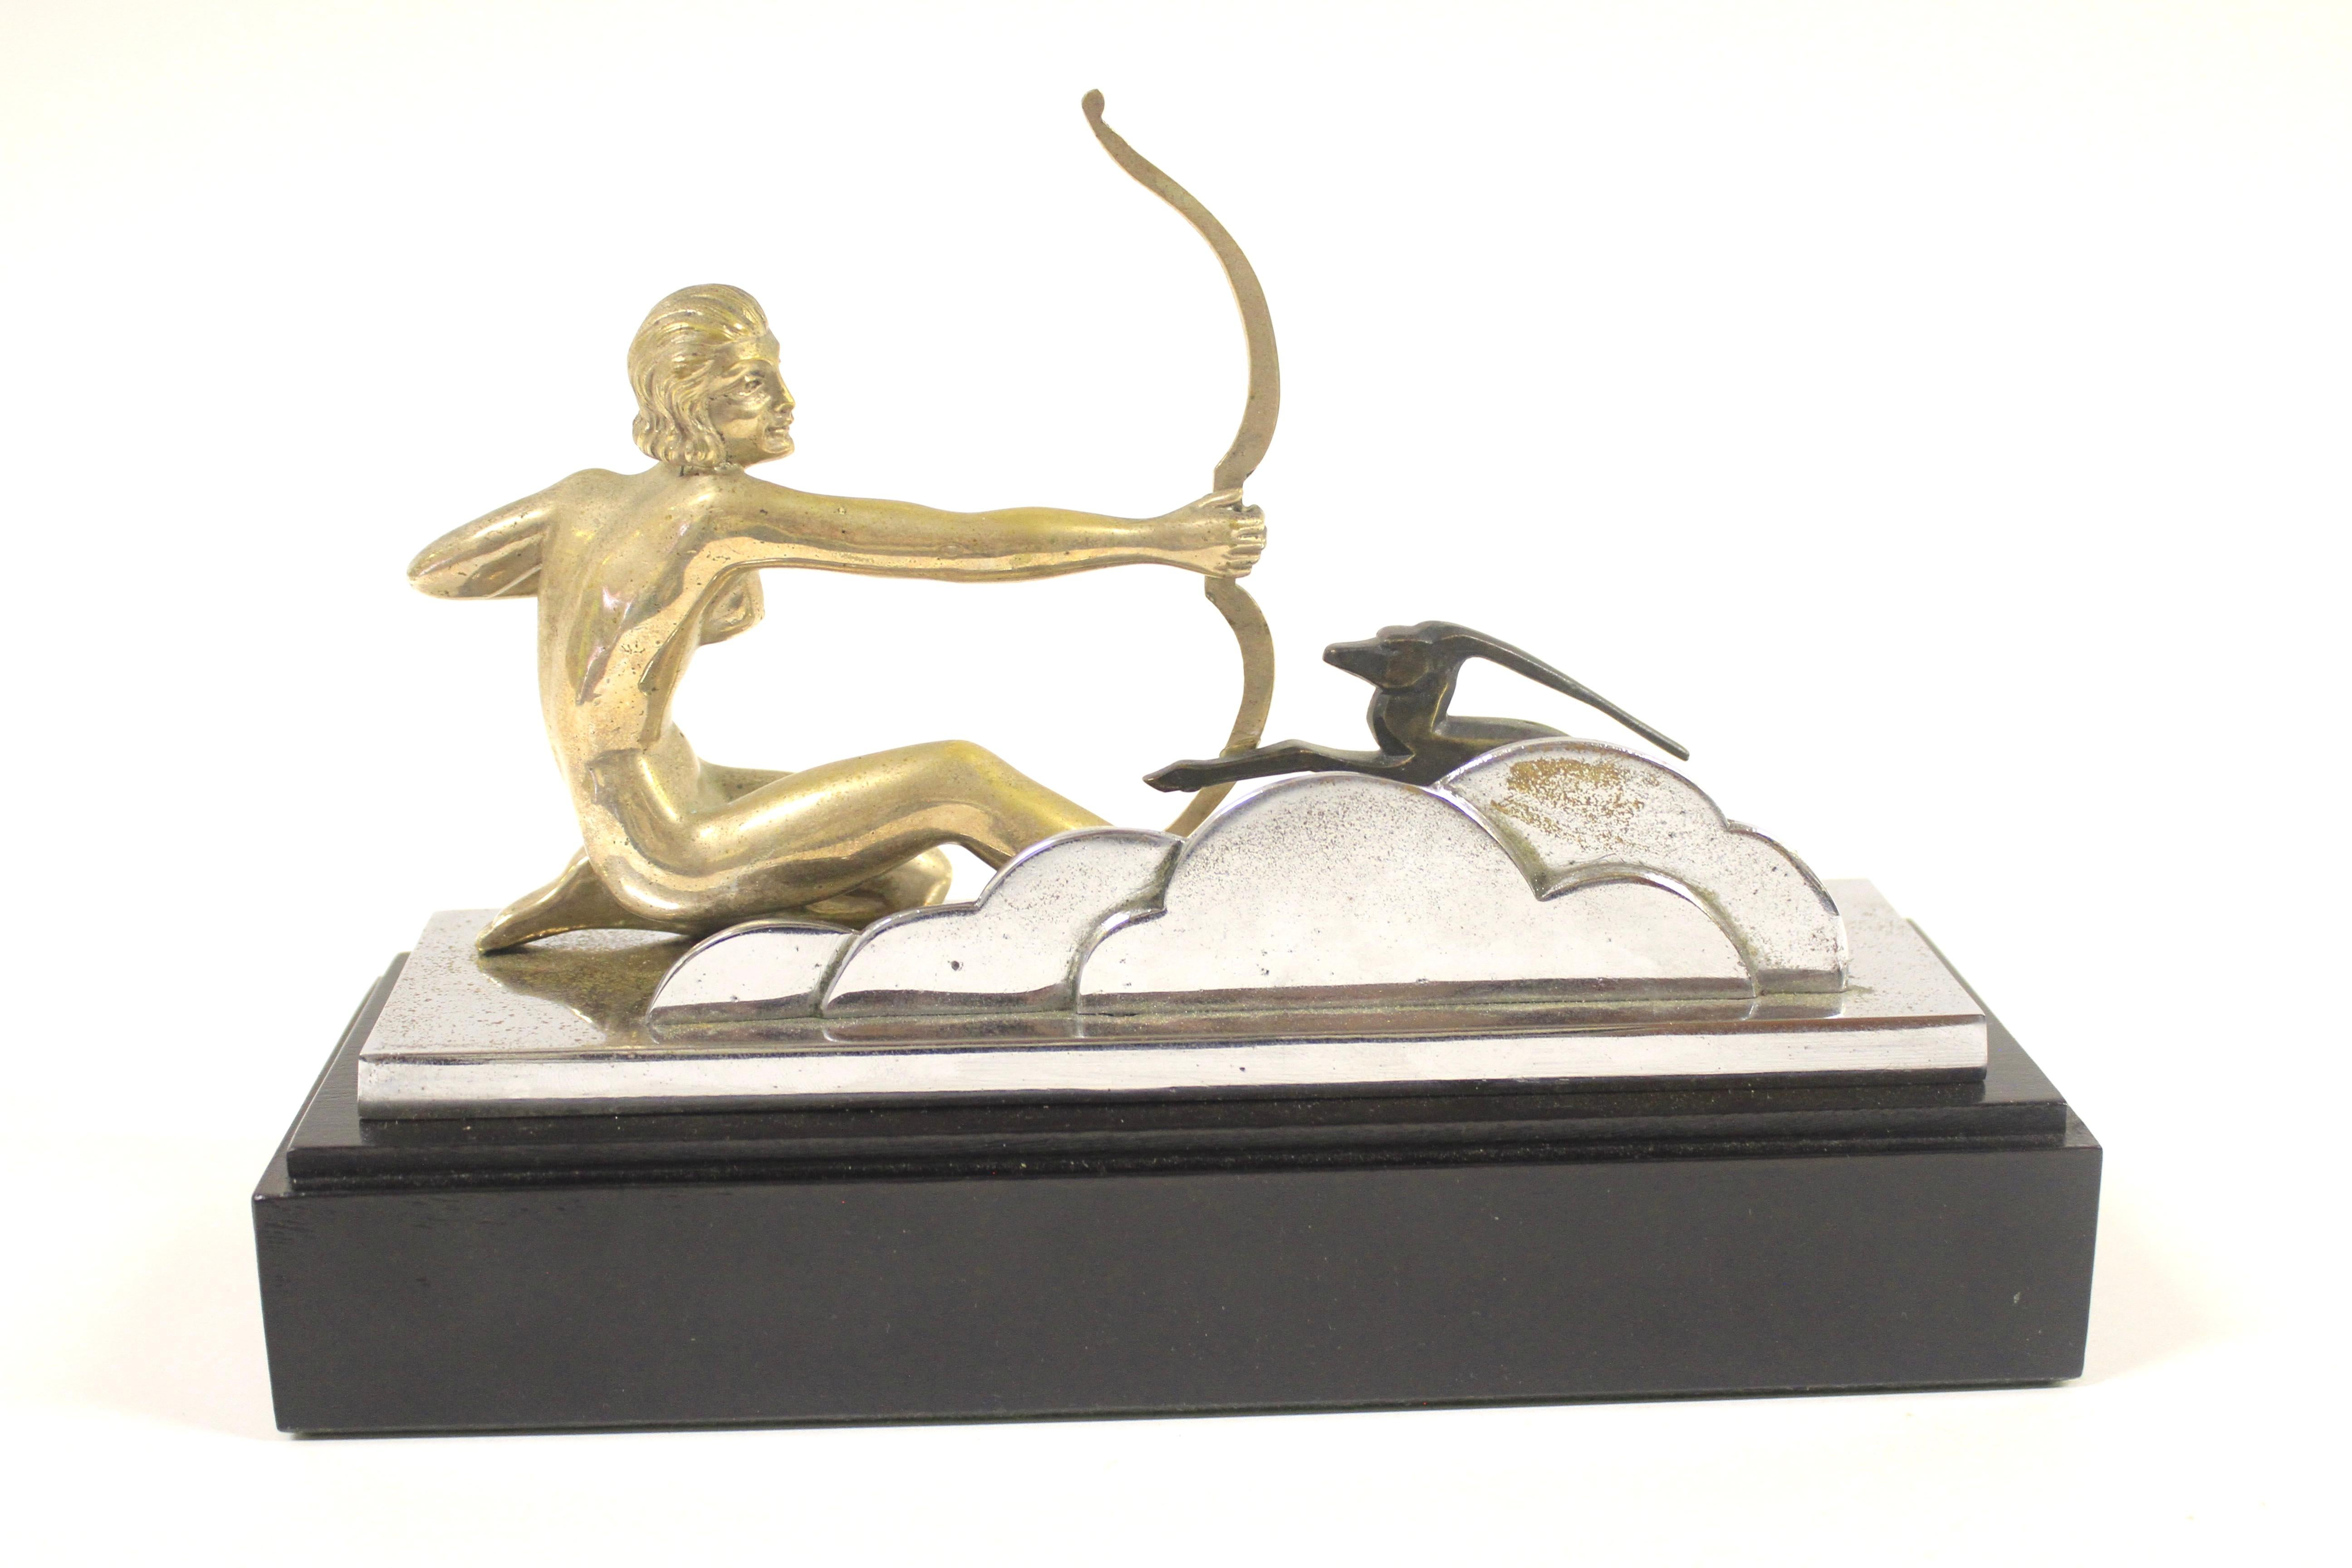 Art Deco Silver Plated Diana the Huntress Figure circa 1930s
Silver plated on Bronze, 
Sylized Bronze figure of a deer, 
Chrome Plated Base and Stylized Backround
[ some pitting to the chrome base] 
Mounted on Ebonised Hardwood stand
Green Baize on